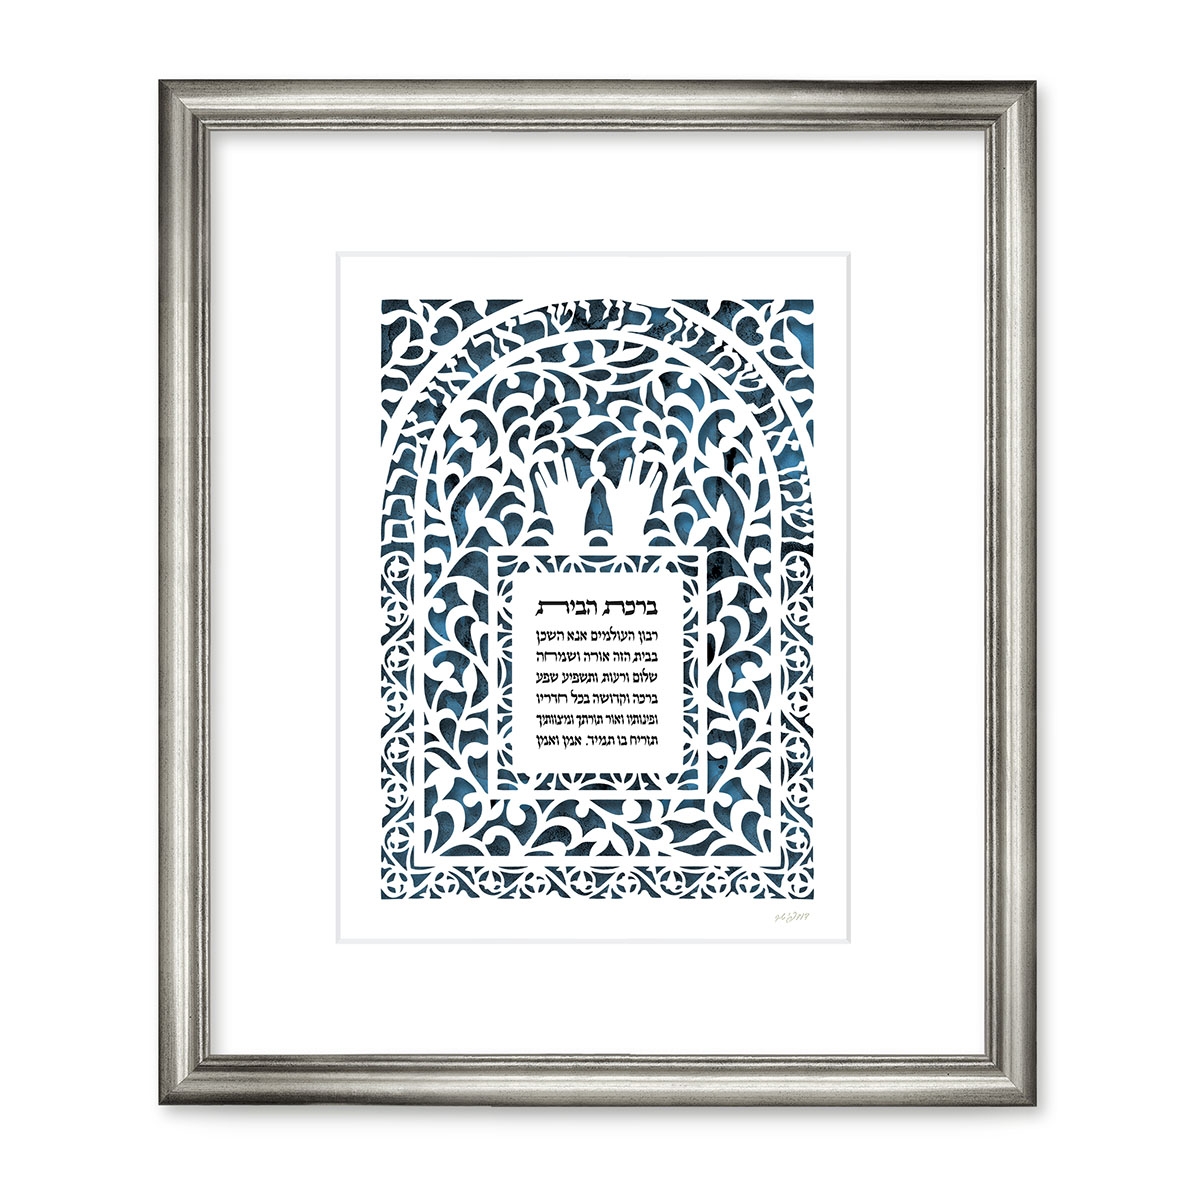 House Blessing/Priestly Blessing. Artist: David Fisher. Laser-Cut Paper - 1